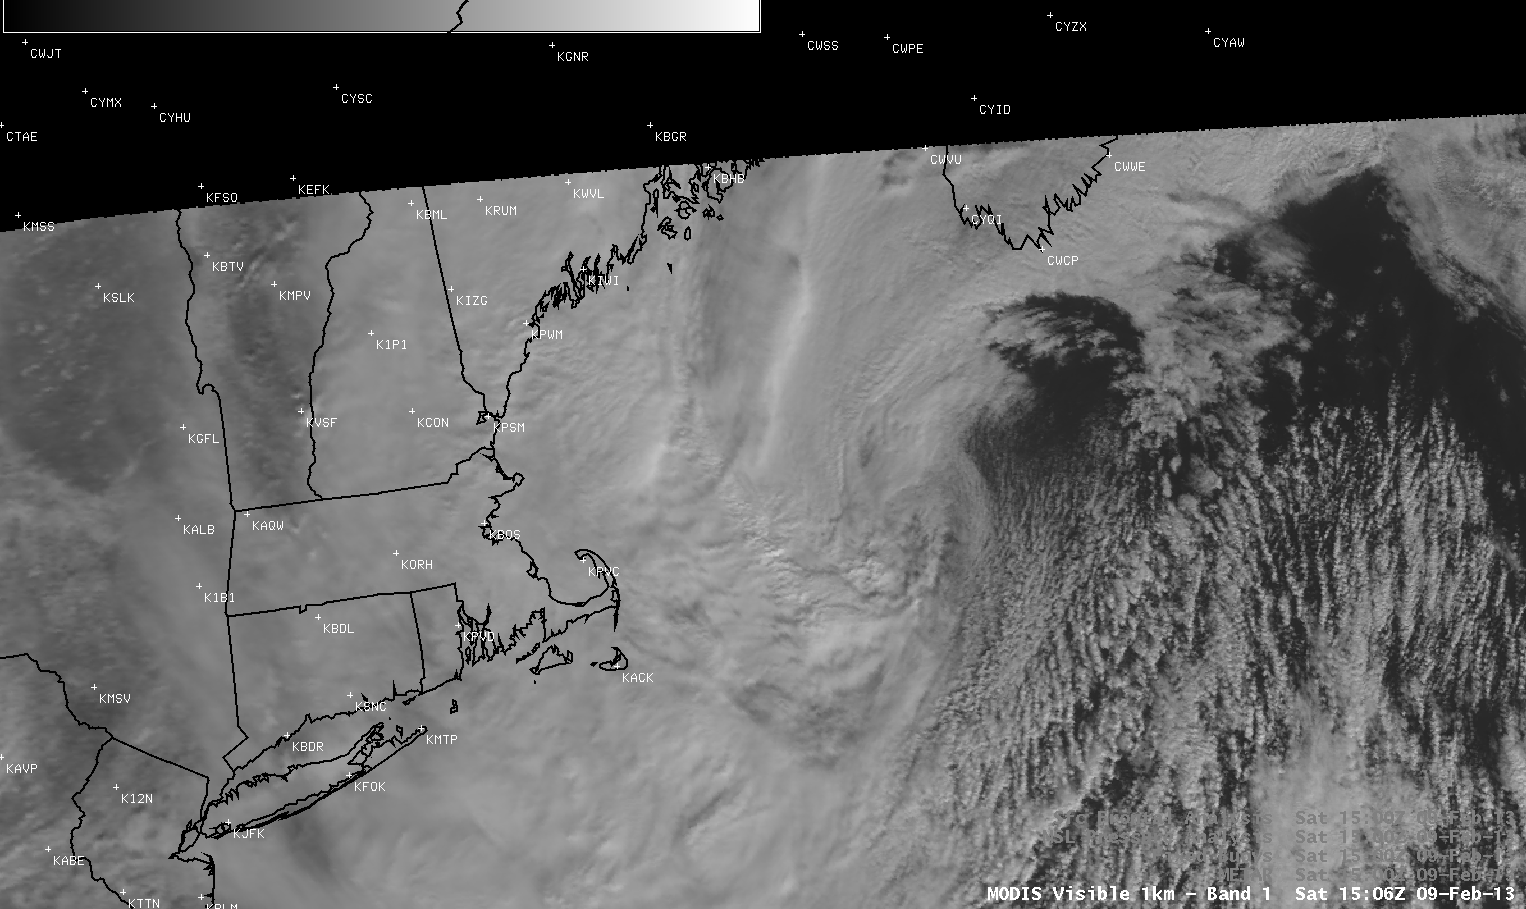 MODIS 0.65 Âµm visible image with surface/buoy reports and surface analysis